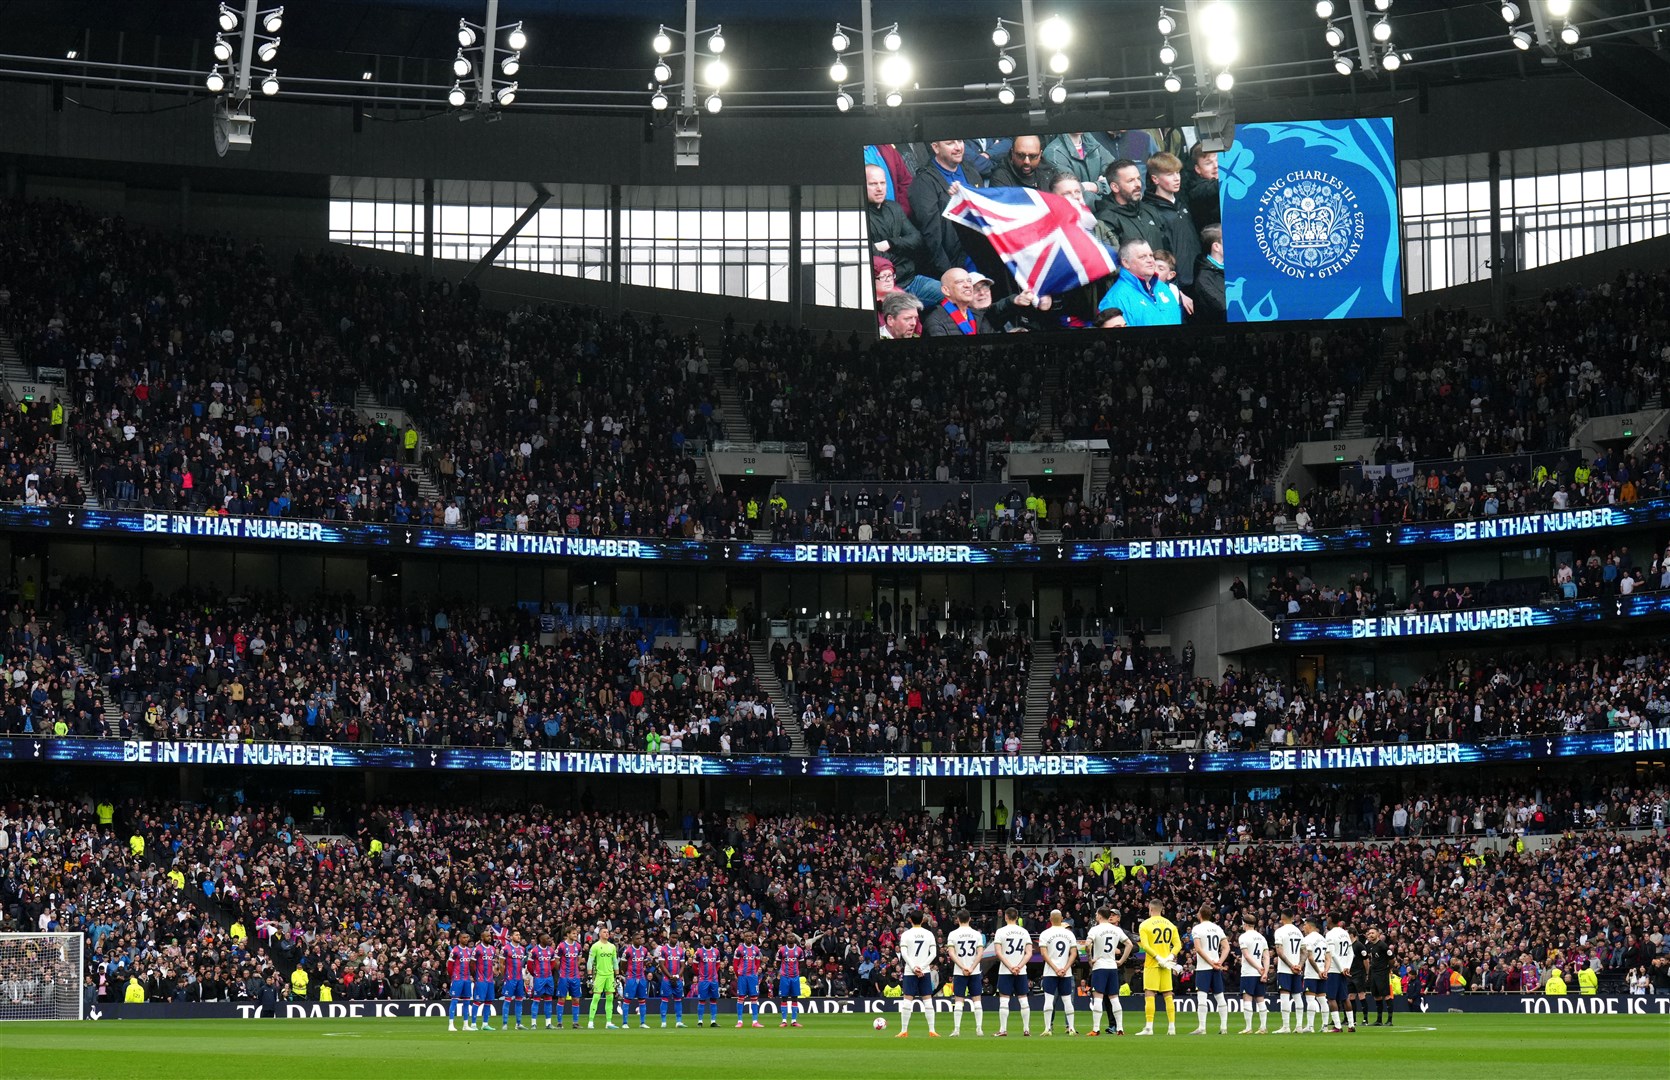 Tottenham Hotspur players stand for the national anthem, to mark the coronation of the King, before their Premier League match against Crystal Palace in London (John Walton/PA)